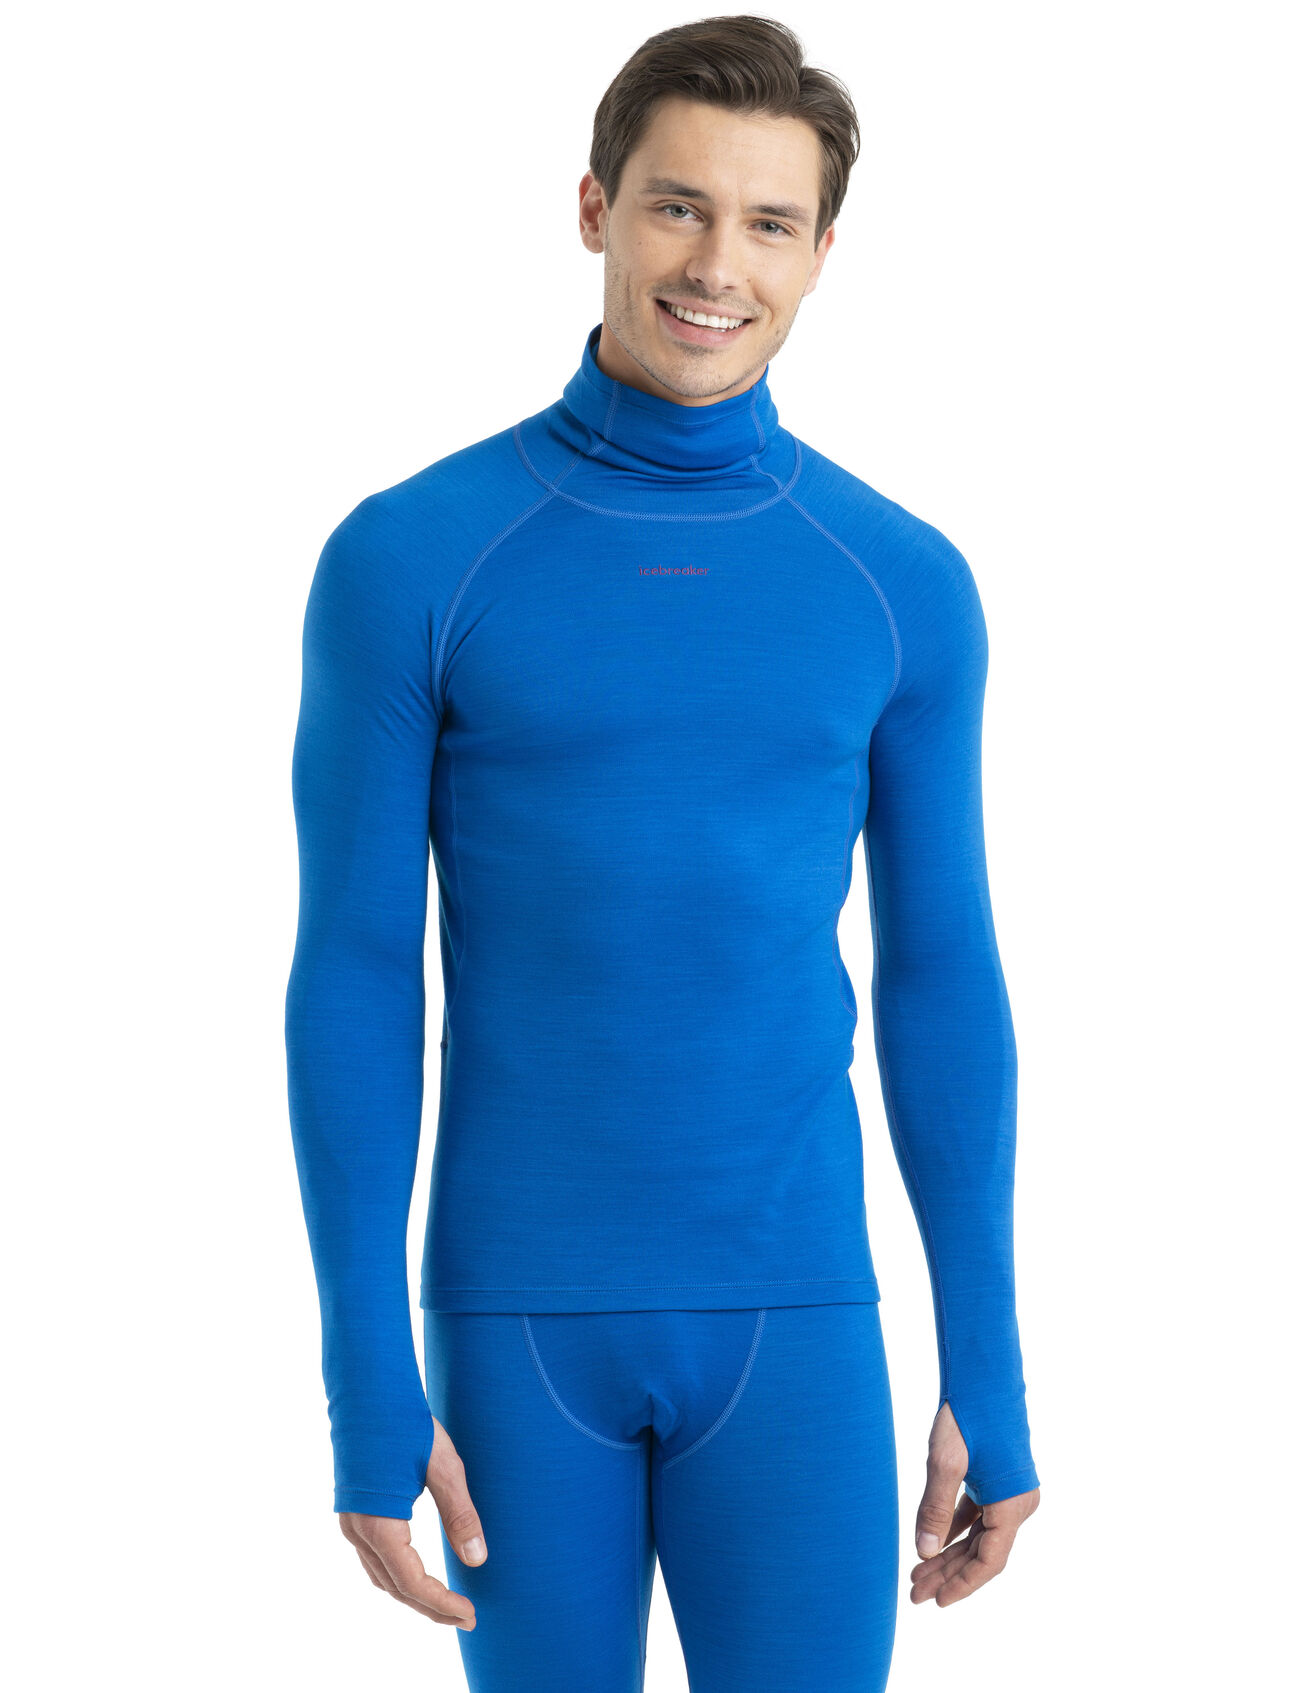 Mens 300 MerinoFine™ Long Sleeve Roll Neck Thermal Top A premium, slim-fit base layer made with luxuriously soft 15.5 micron merino wool fibers and a high-neck design for added protection, the MerinoFine™ Long Sleeve Roll Neck is at the intersection of comfort and performance.